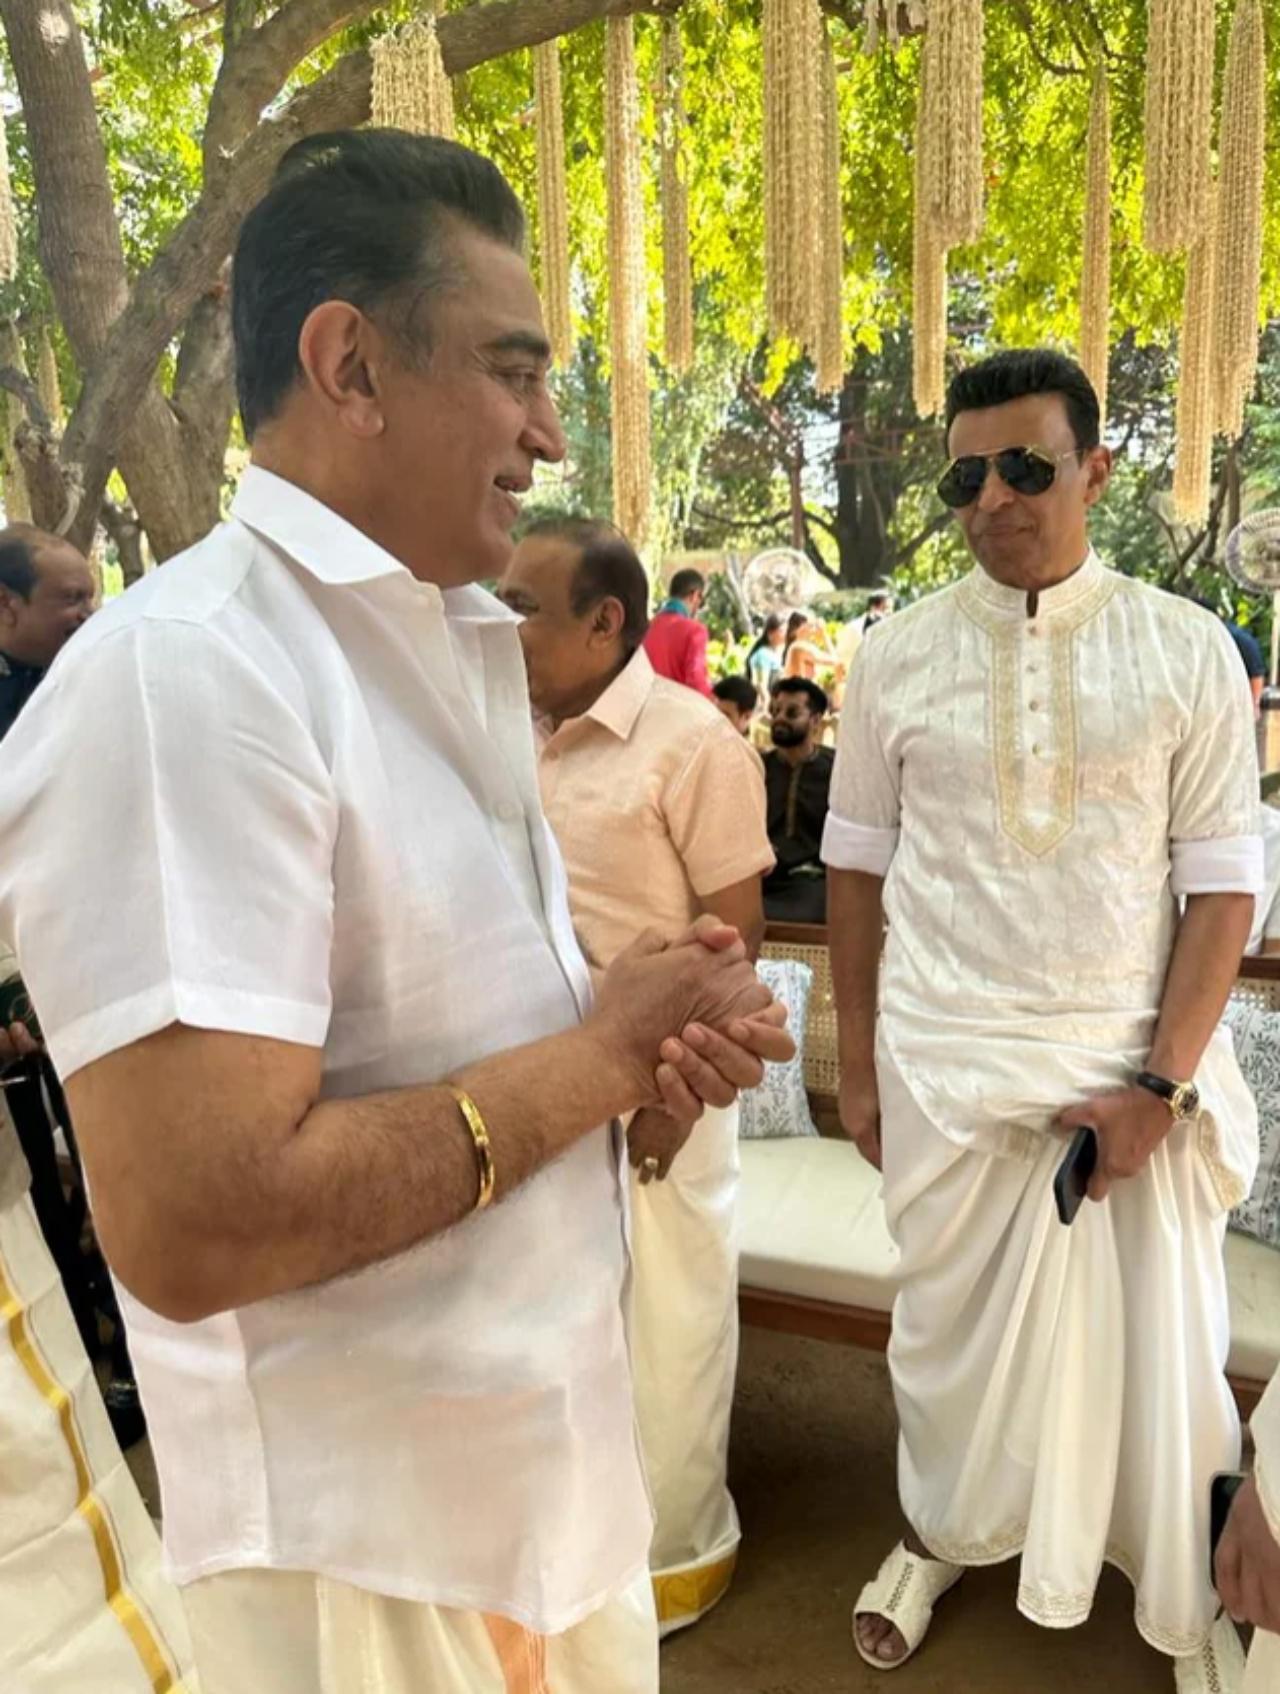 From Kamal Haasan to Aamir Khan, Mohanlal, Karan Johar, Prithviraj and Akshay Kumar, the South Indian styled wedding in Jaipur was quite the starry affair. Pictures from the wedding of the actors enjoying has now made its way to social media